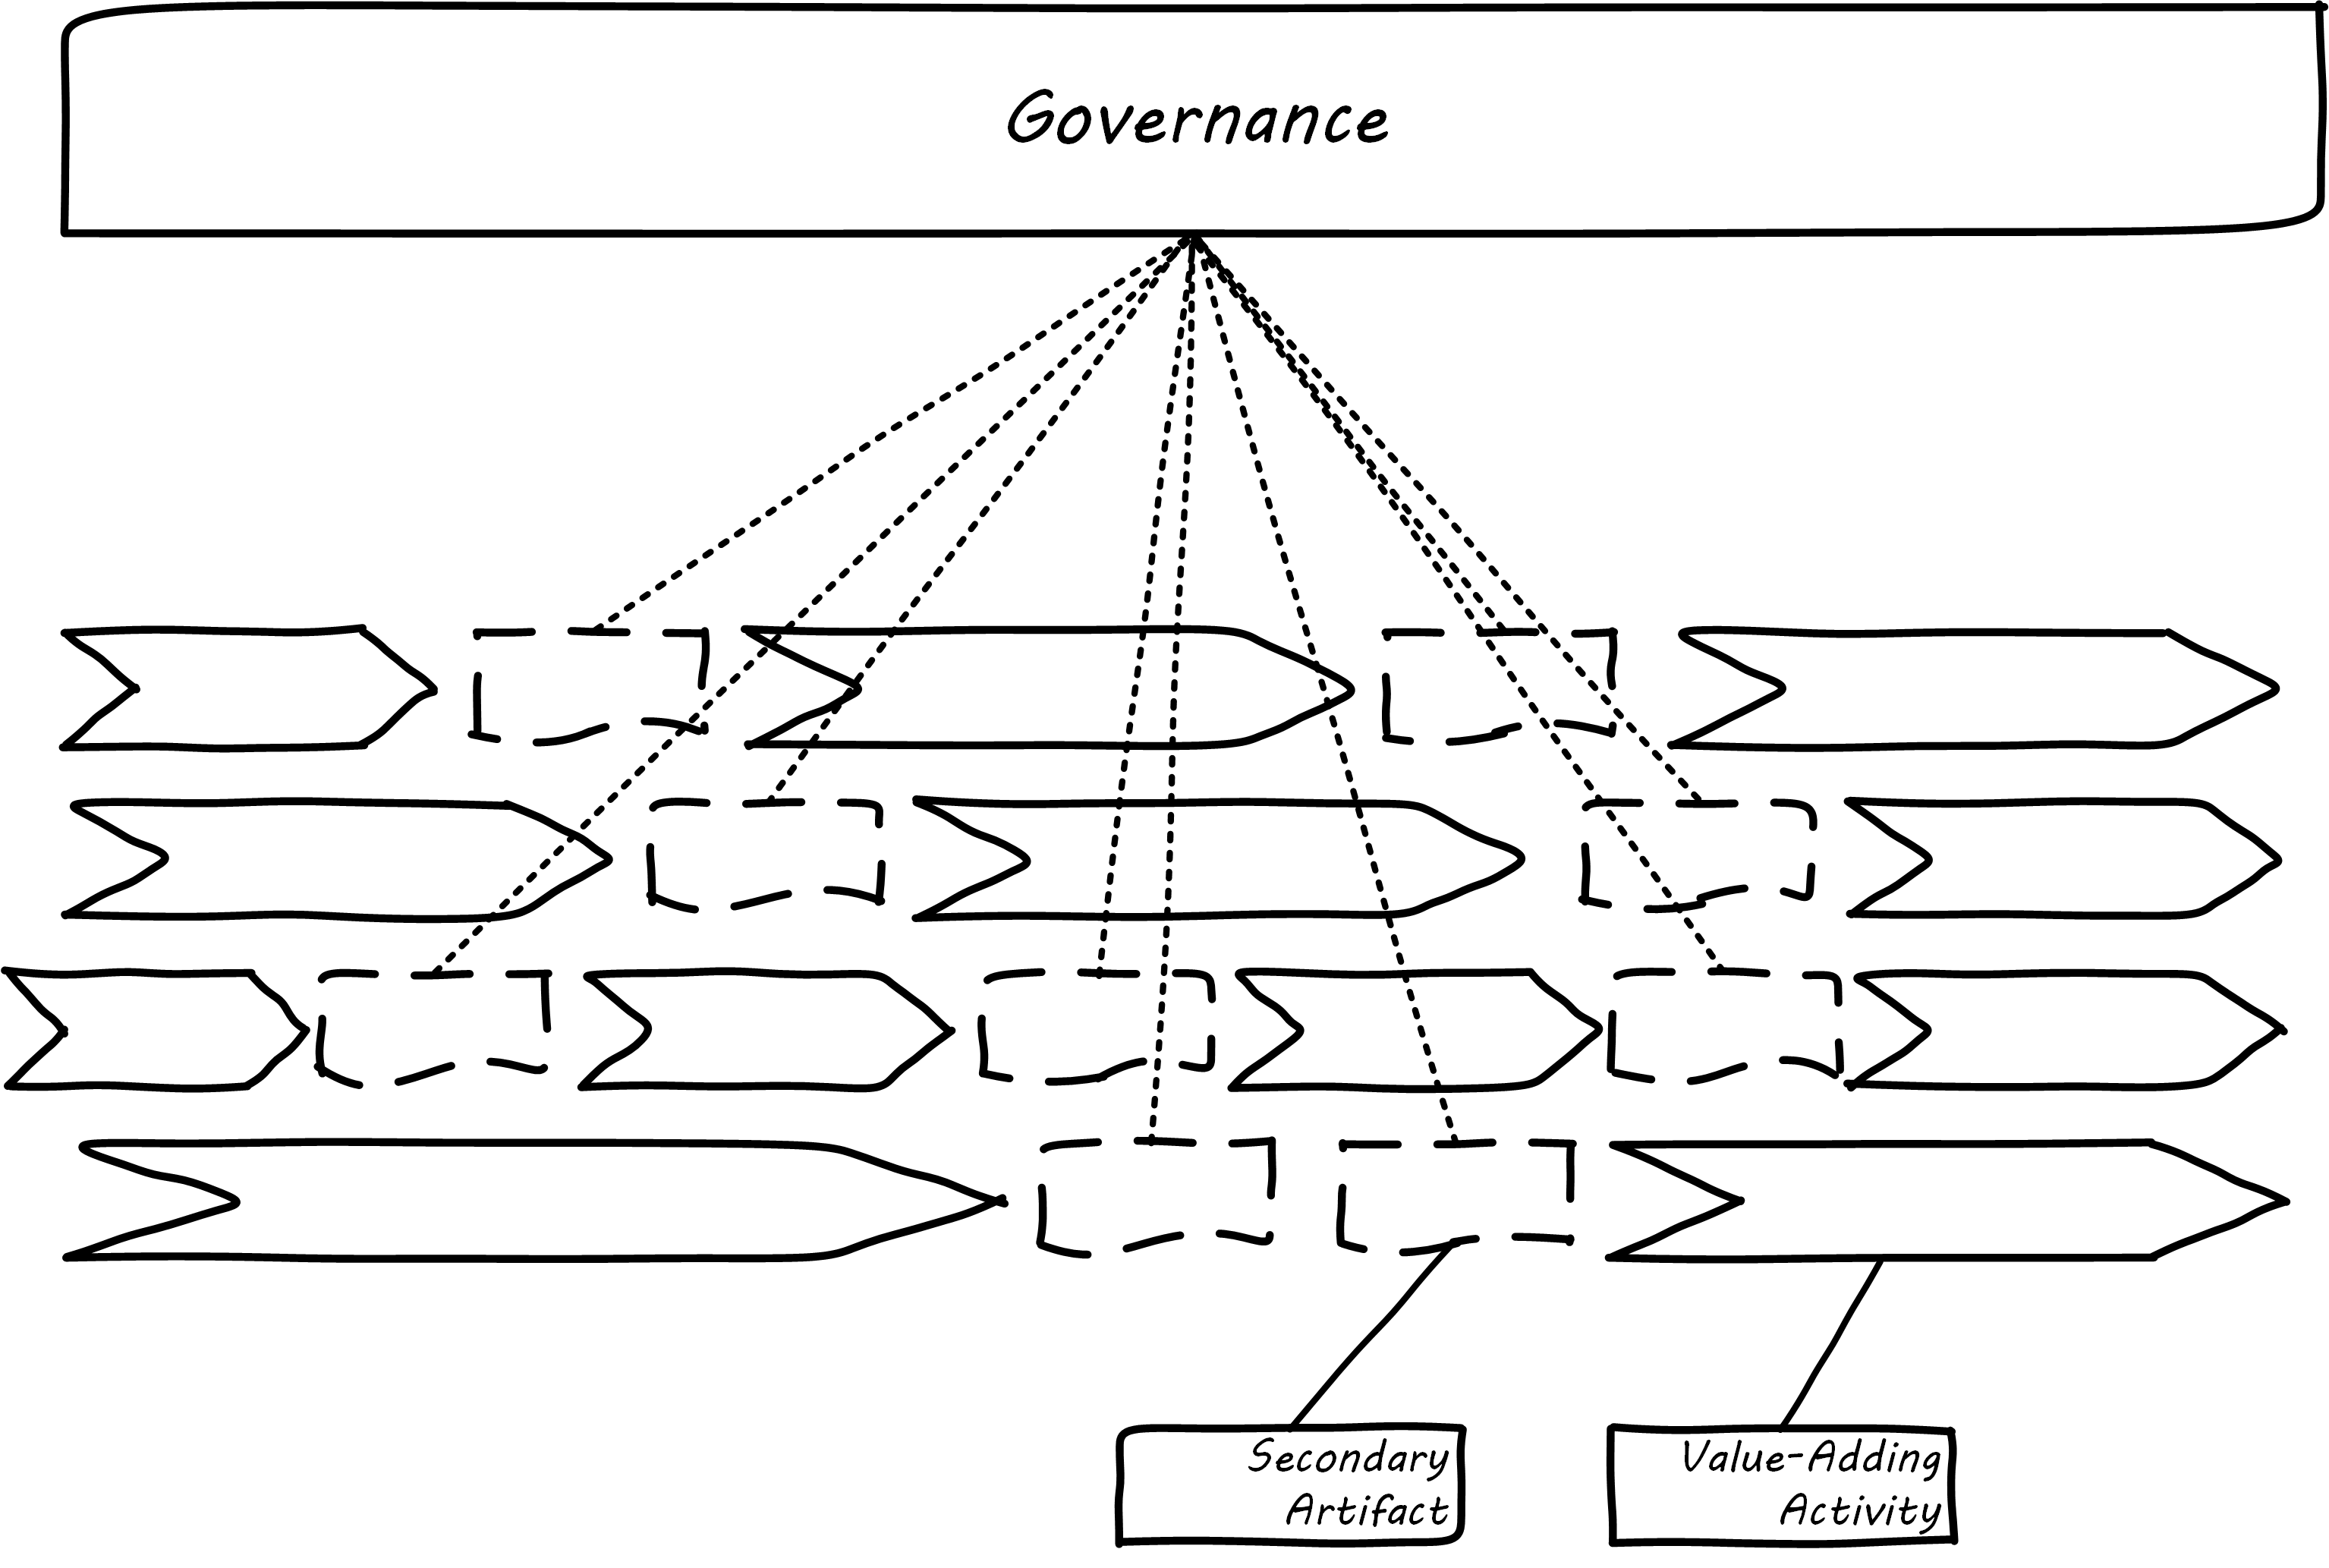 governance based on secondary artifacts